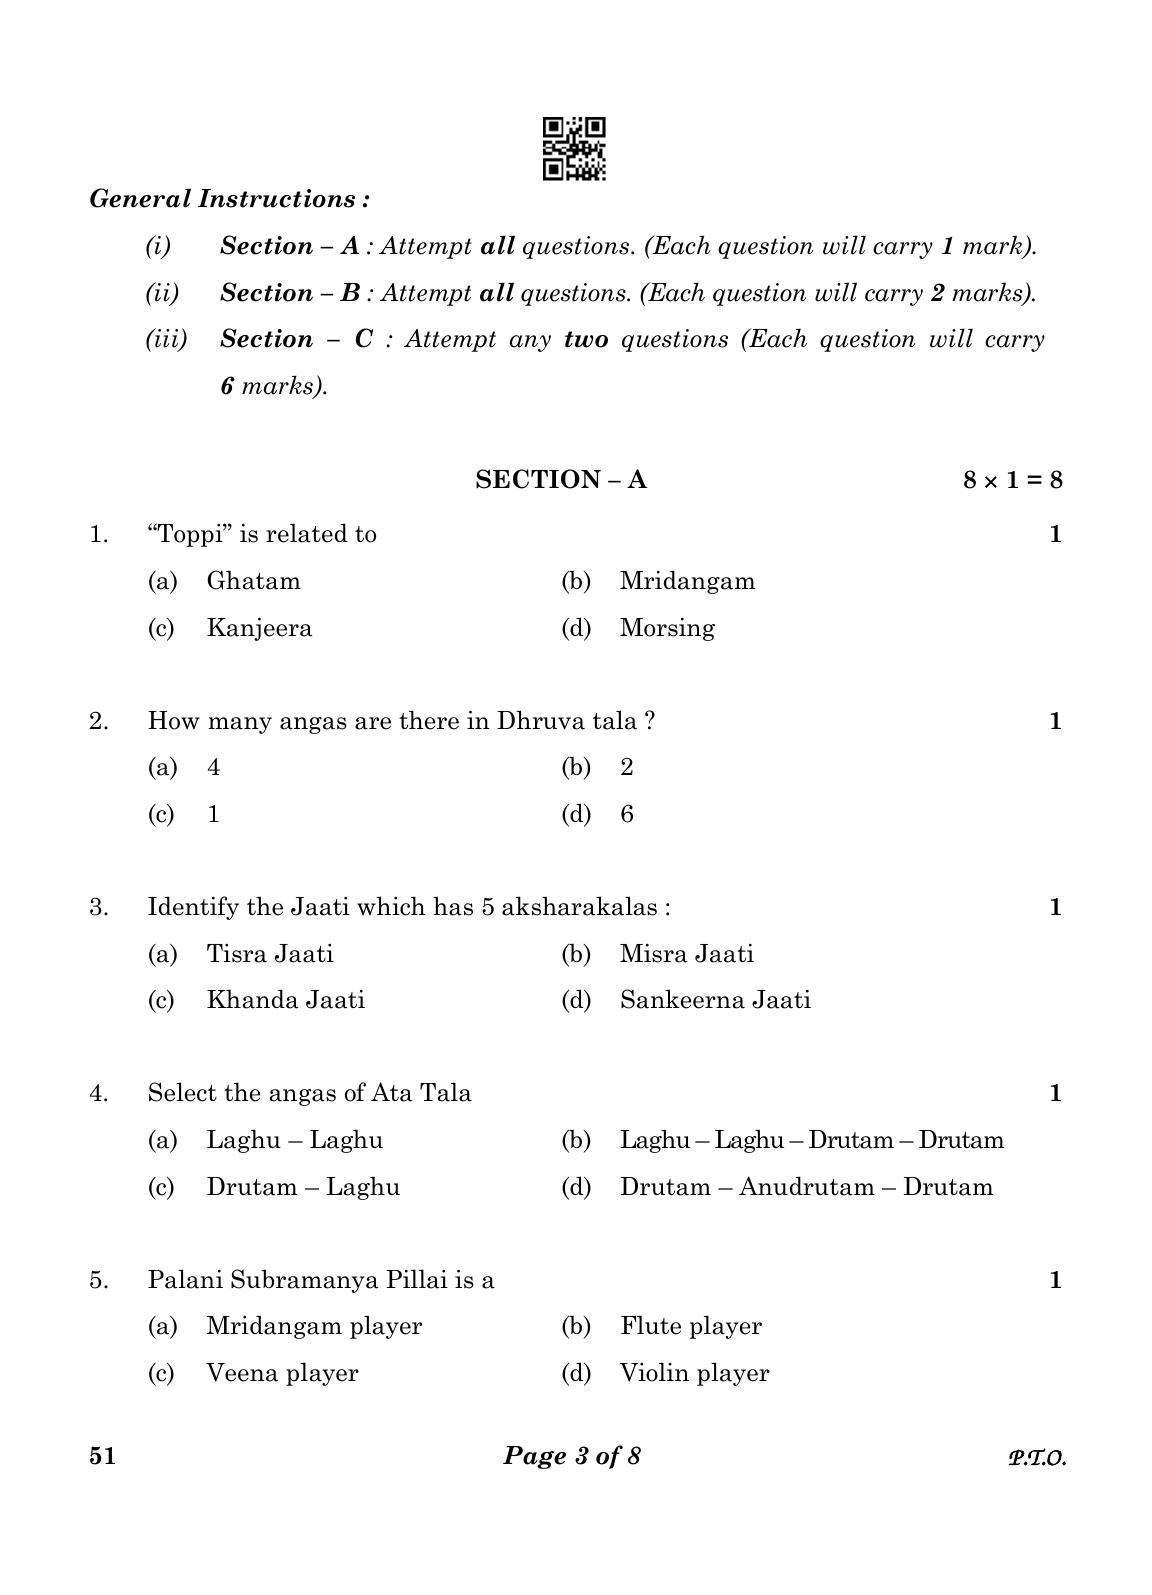 CBSE Class 10 51 CARNATIC MUSIC (Percussion Instruments) 2023 Question Paper - Page 3